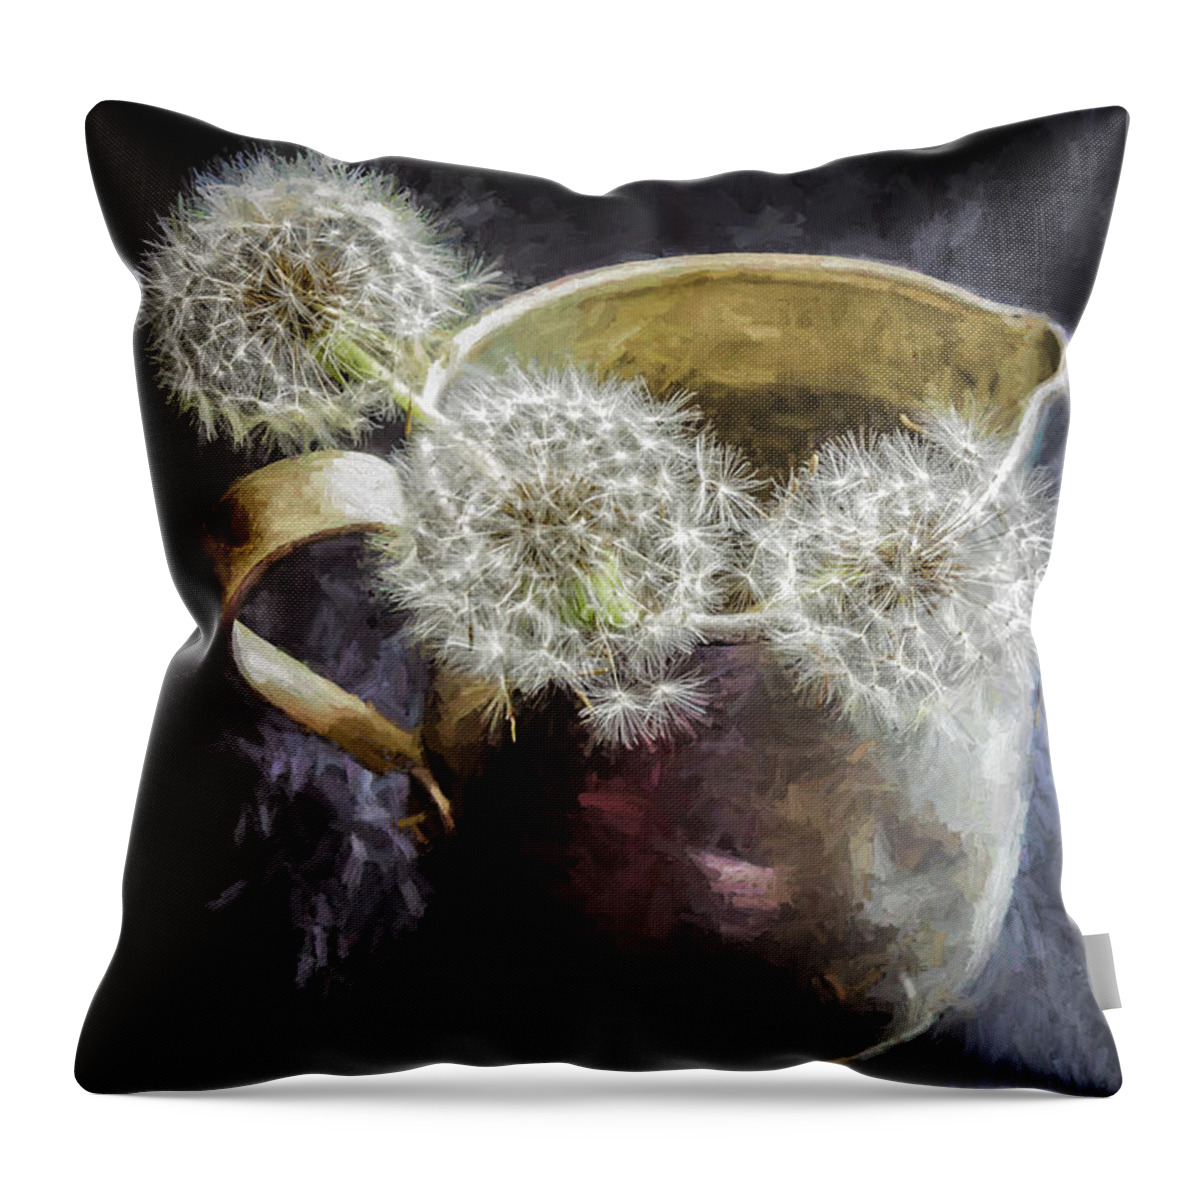 Plant Throw Pillow featuring the photograph Dandelion Blowballs in Tin Pitcher by Kathleen K Parker